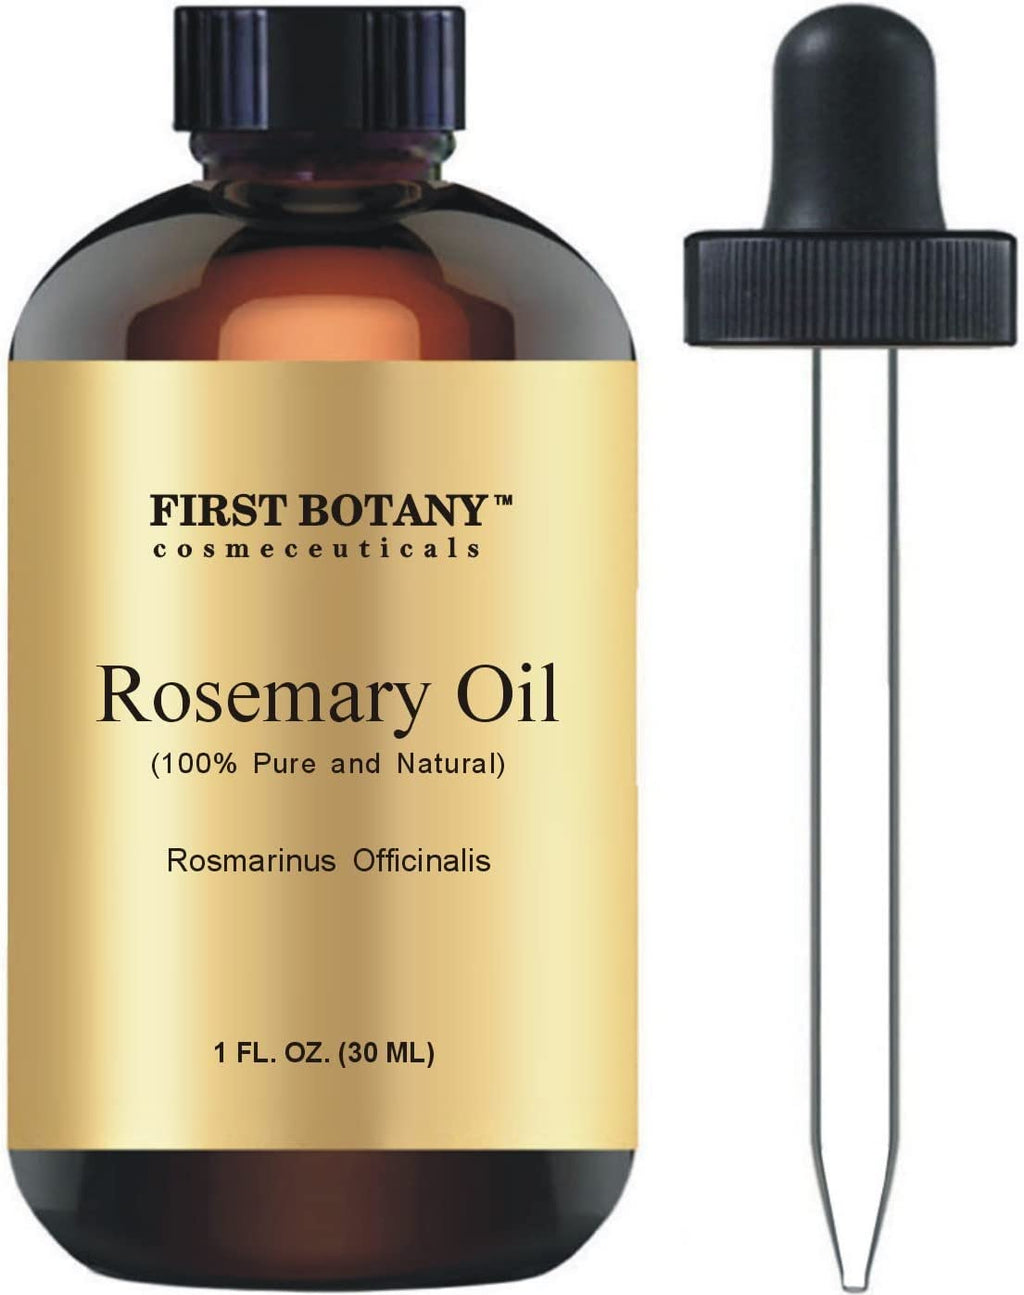 100% Pure Rosemary Essential Oil - Premium Rosemary Oil for Aromatherapy, Massage, Topical & Household Uses - 1 fl oz (Rosemary)